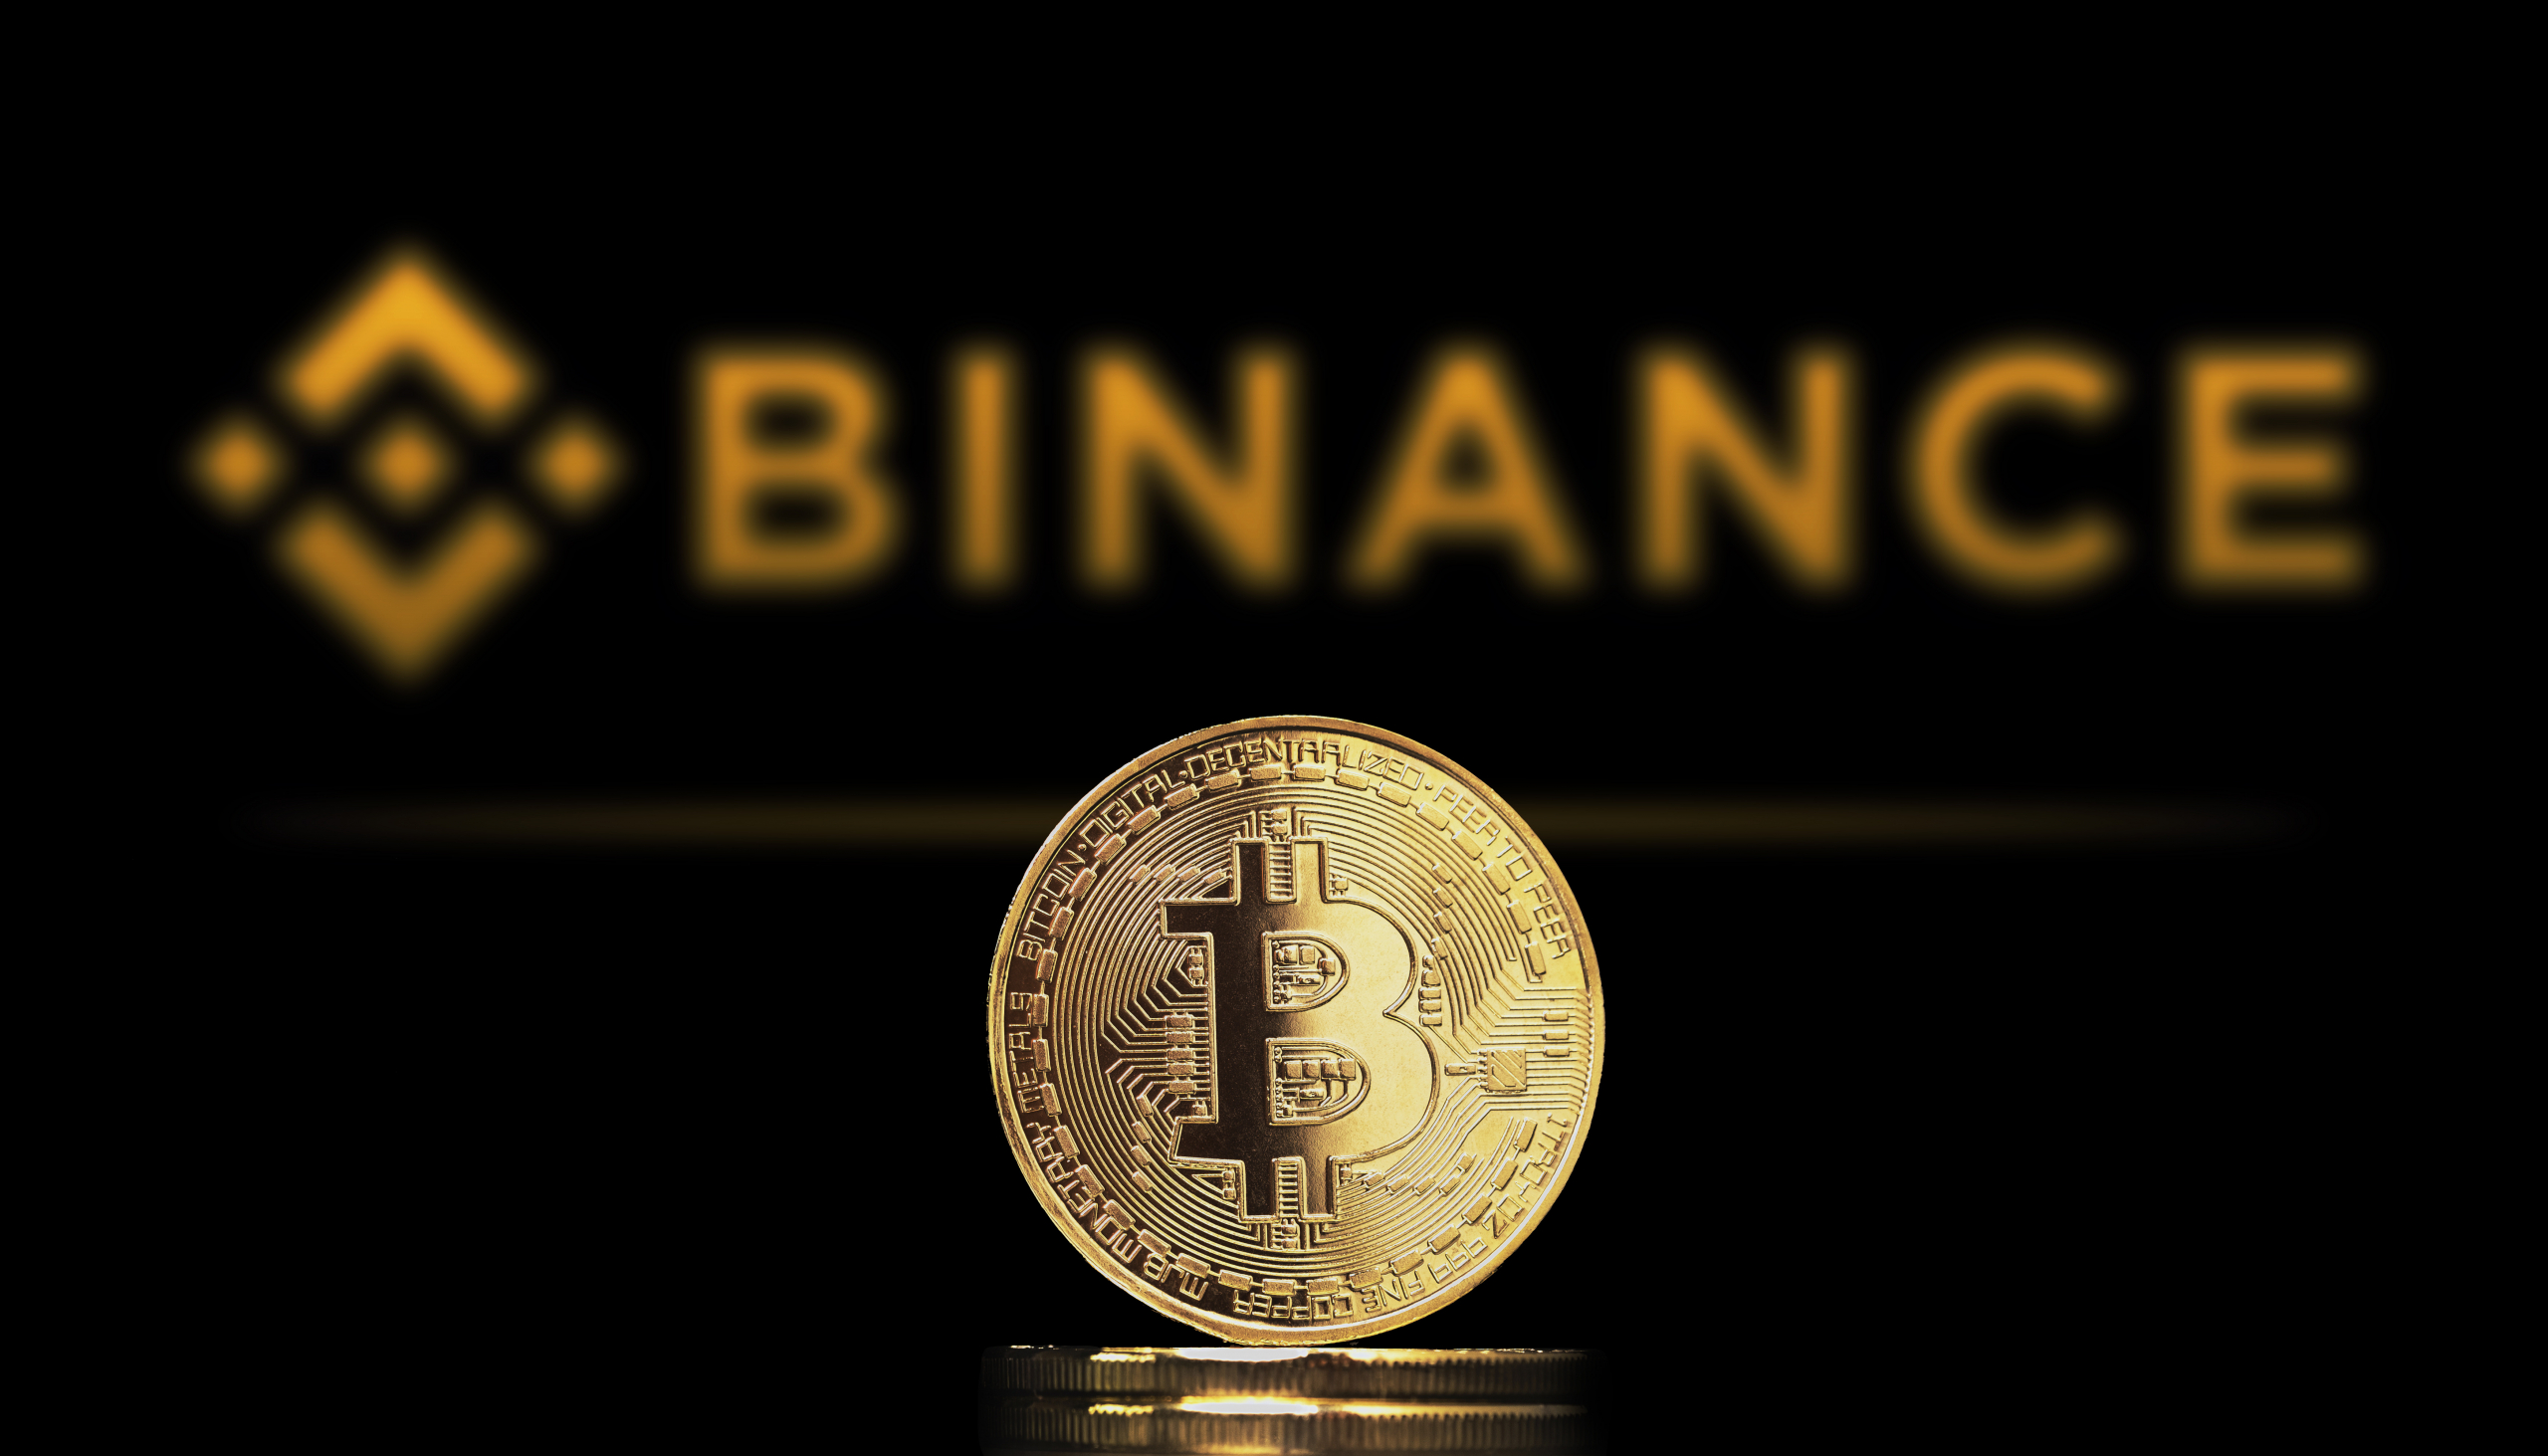 Bitcoin trading volume on Binance shoots to record high, but turns out to be largely fake
